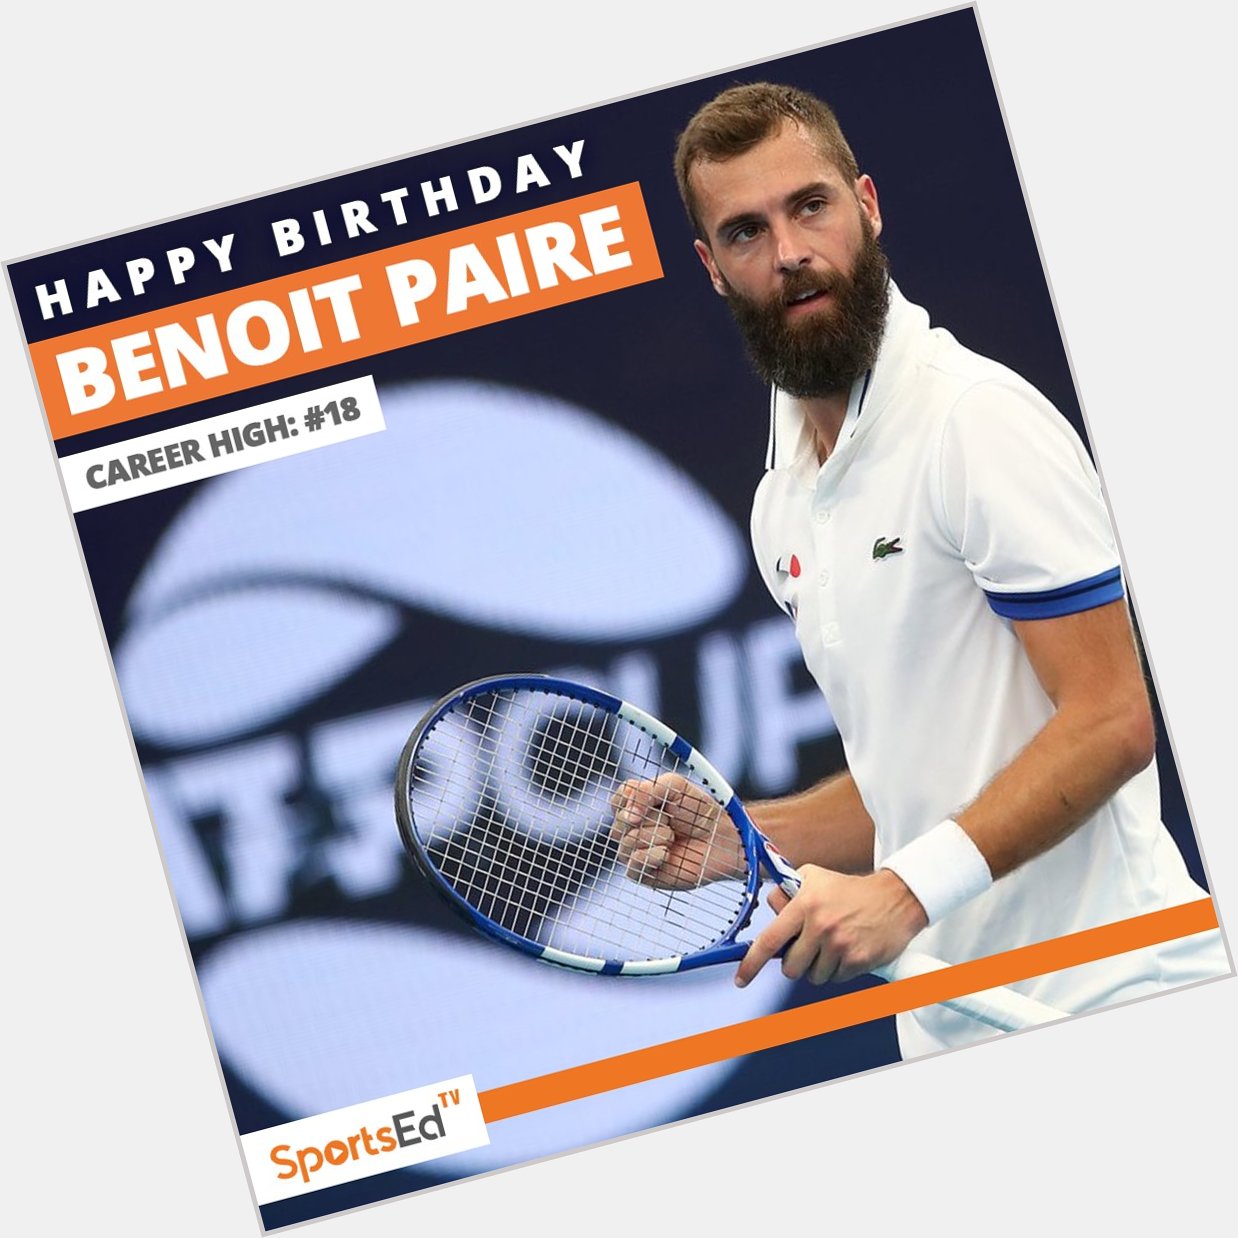 Happy Birthday to one of the best French players in the world, Benoit Paire! 